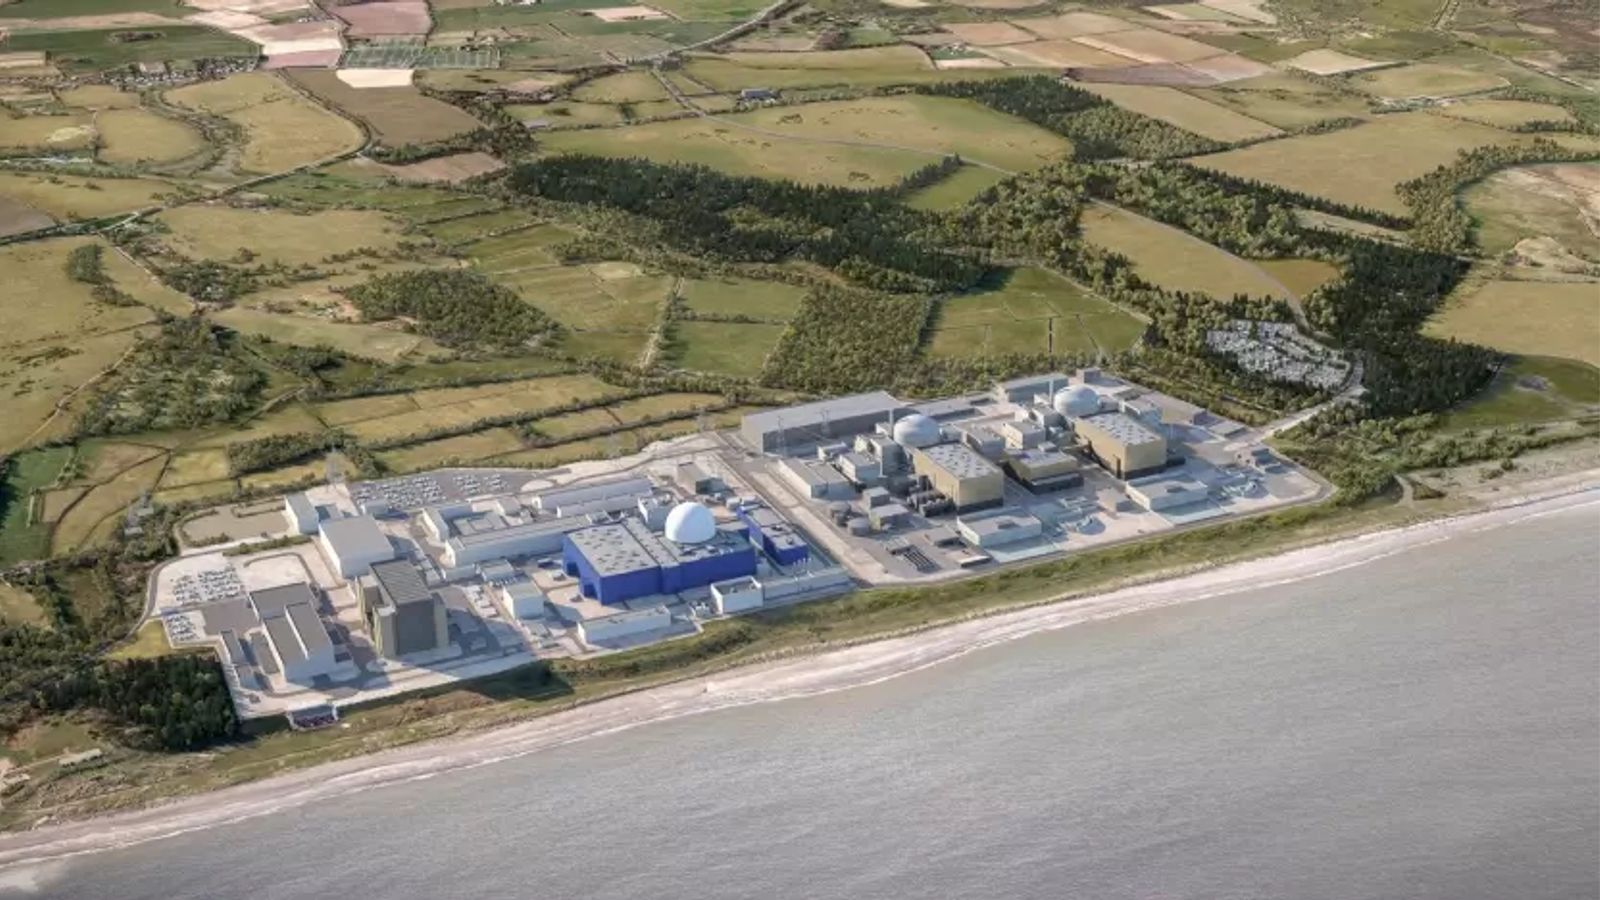 Sizewell C nuclear power plant go-ahead reconfirmed with £700m public investment, Shapps announces